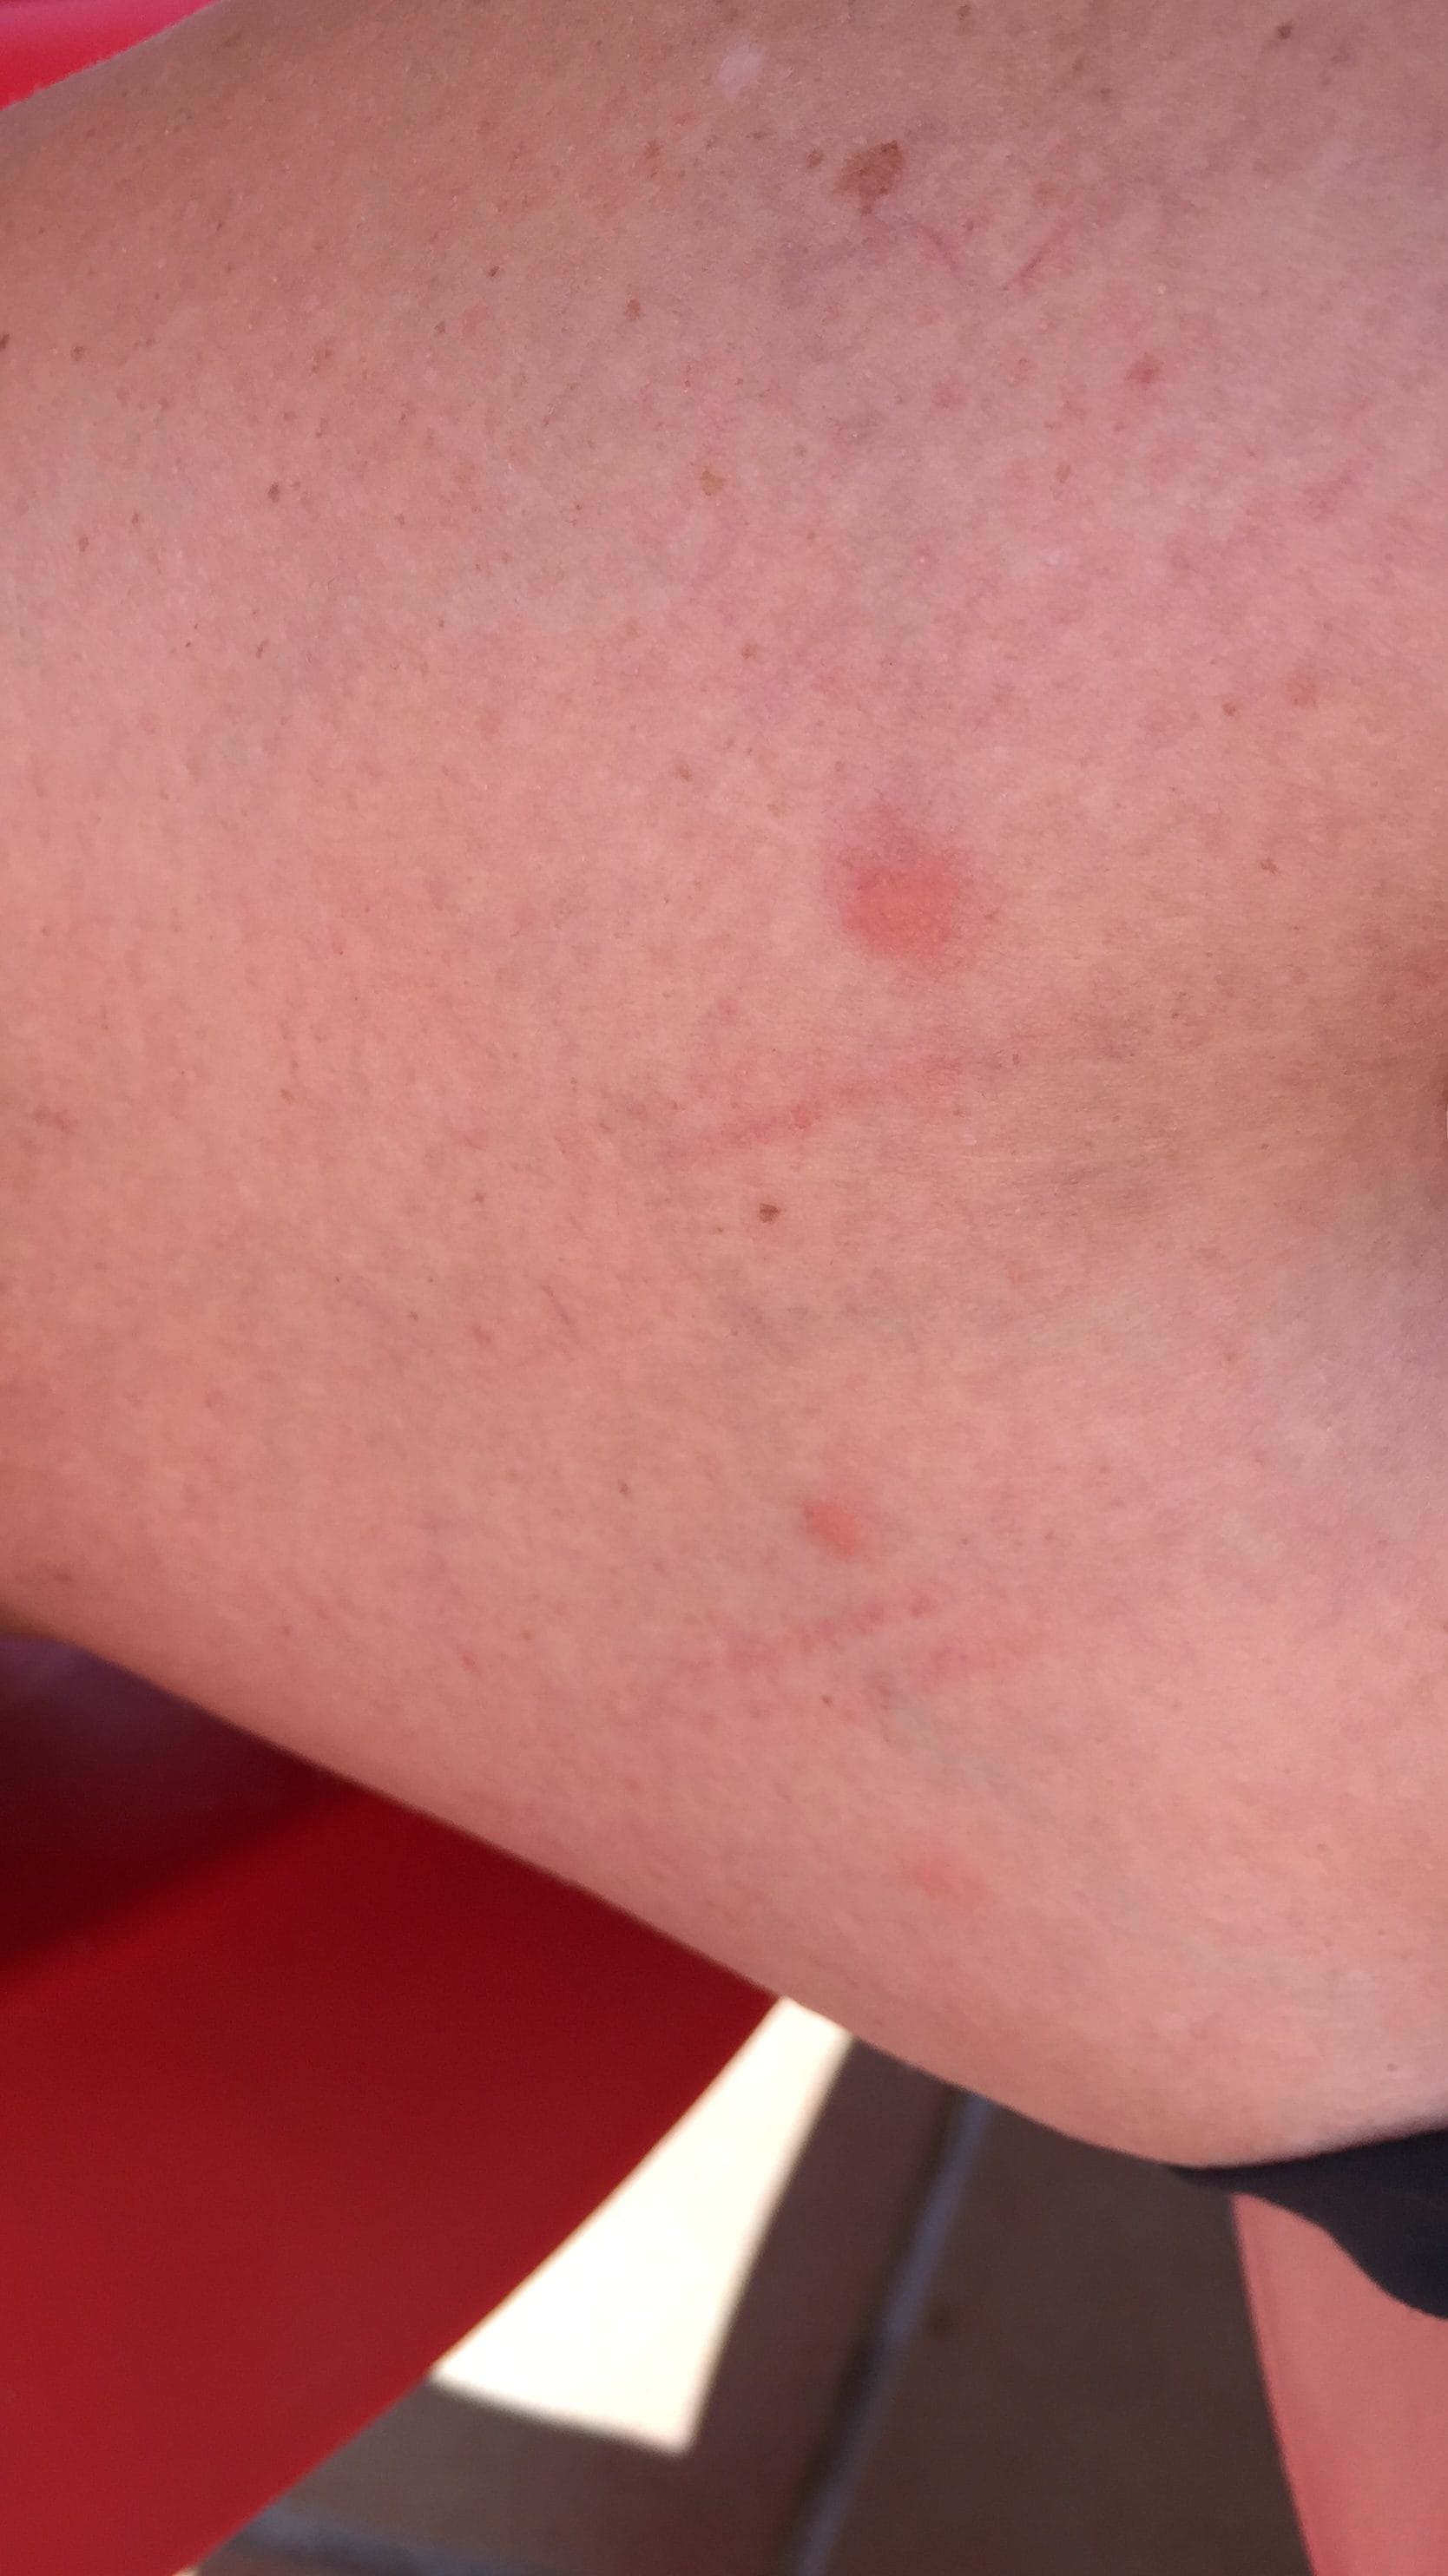 First signs of bedbug bites on legs